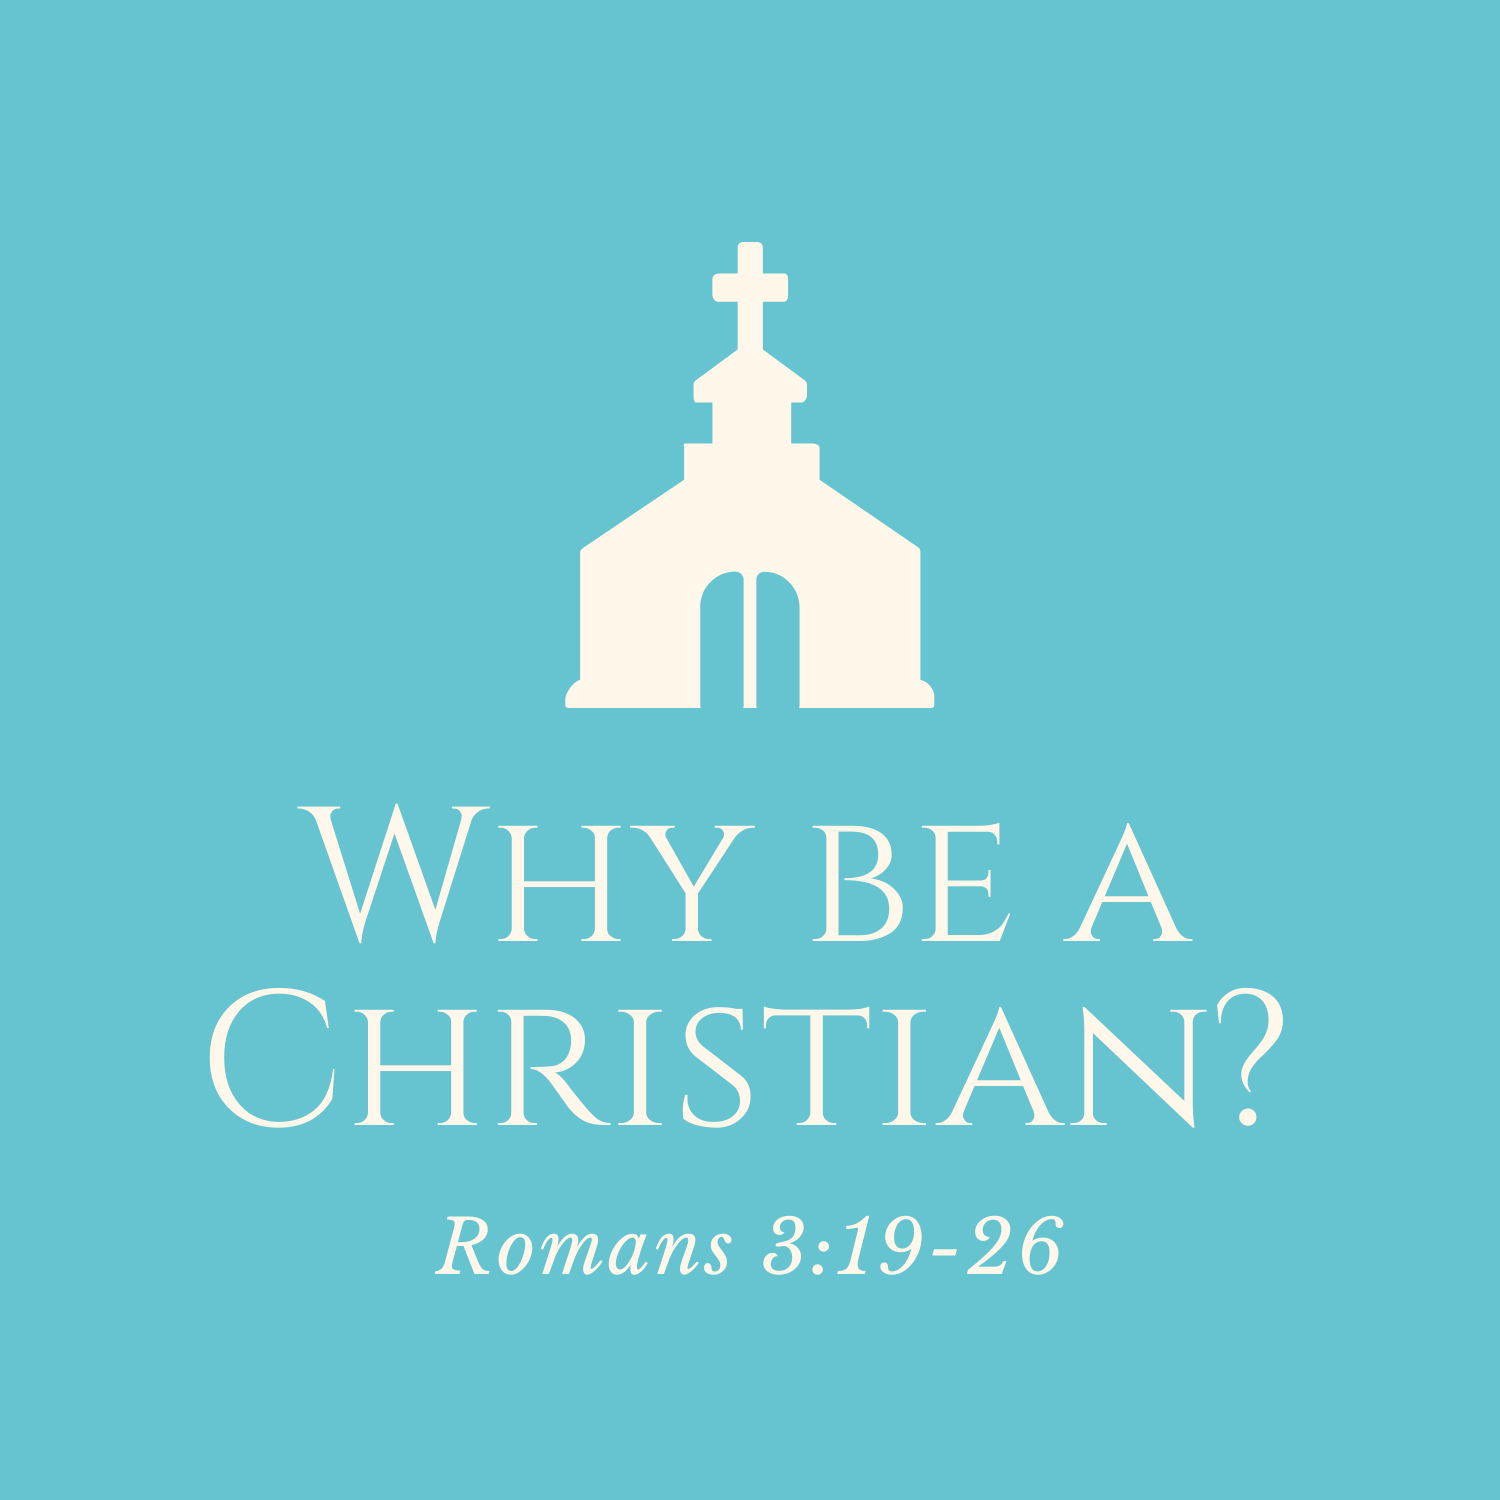 Romans 3:19-26 - Why Become a Christian?